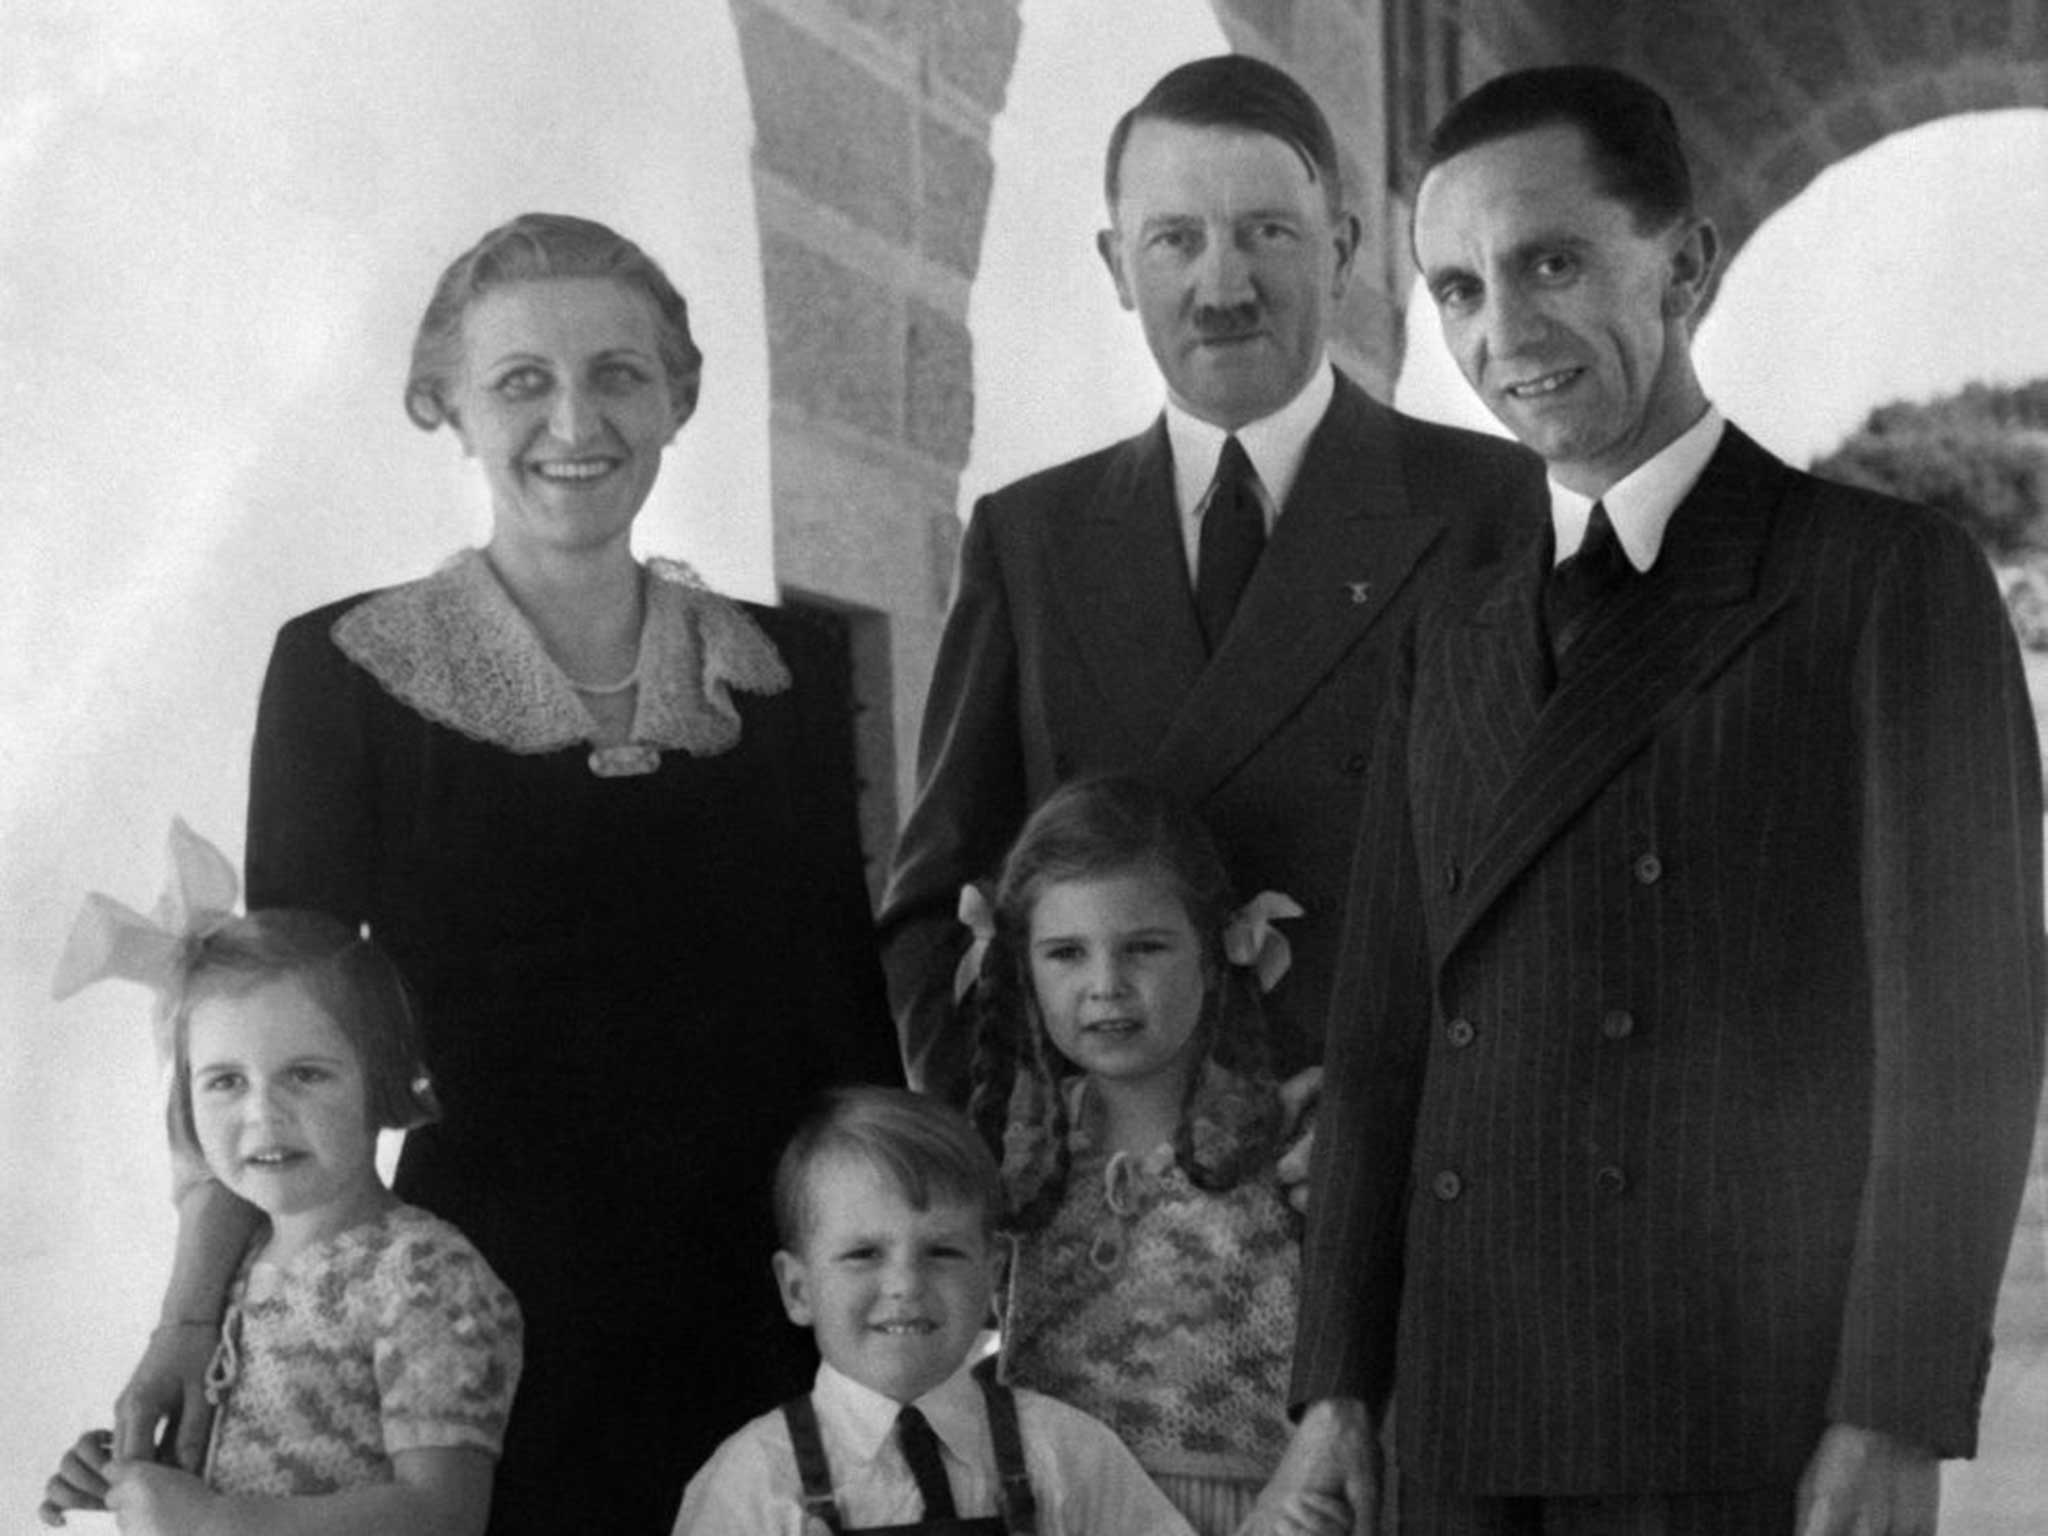 Public face, private vice: Joseph and Magda Goebbels with Hitler in 1938